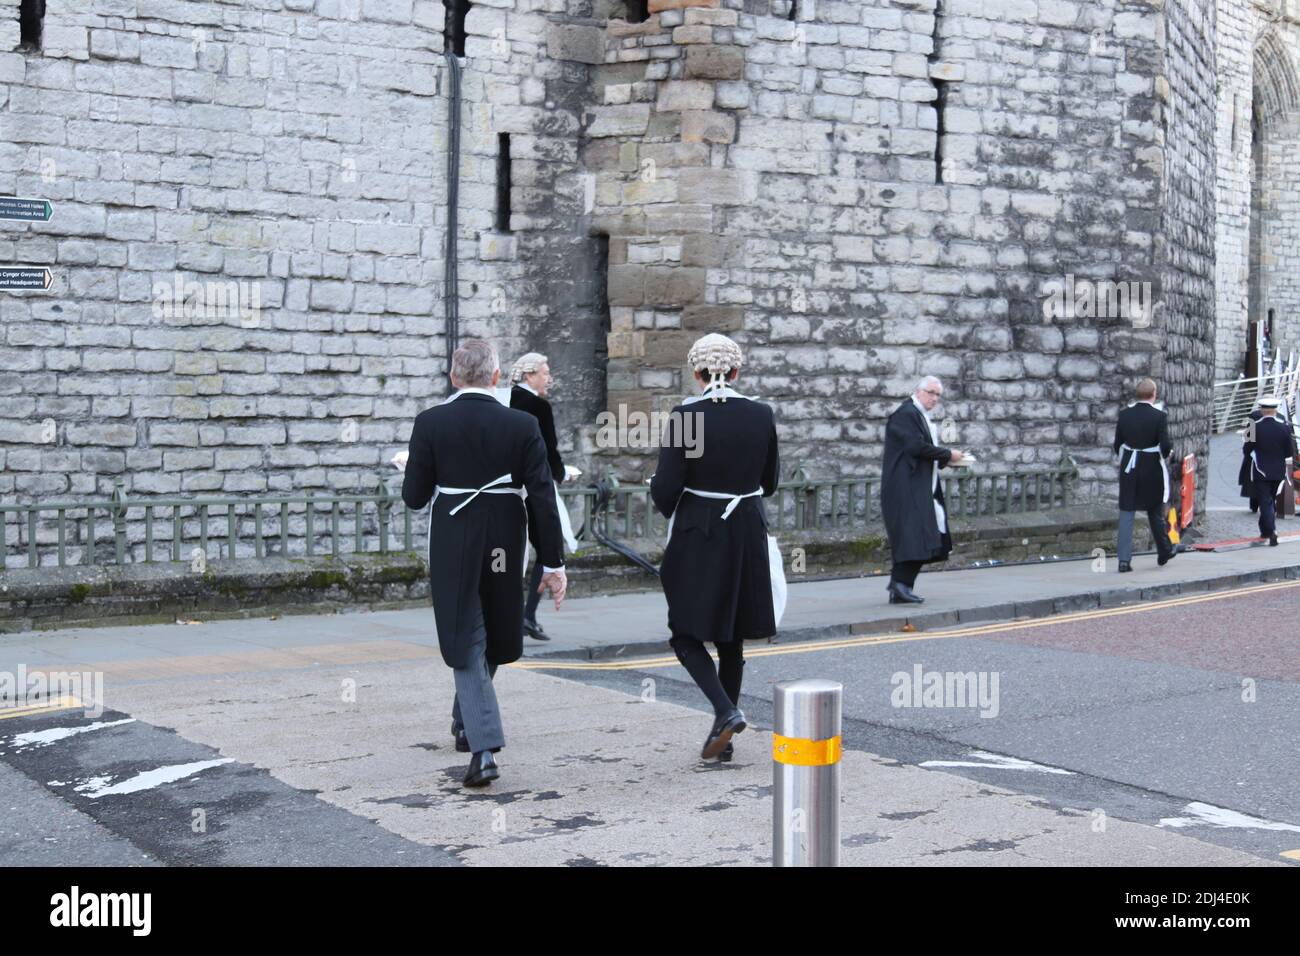 Netflix Drama the Crown filming the Investiture of Prince Charles at Caernarfon castles, North Wales Credit: Mike Clarke/ Alamy Stock Photos Stock Photo